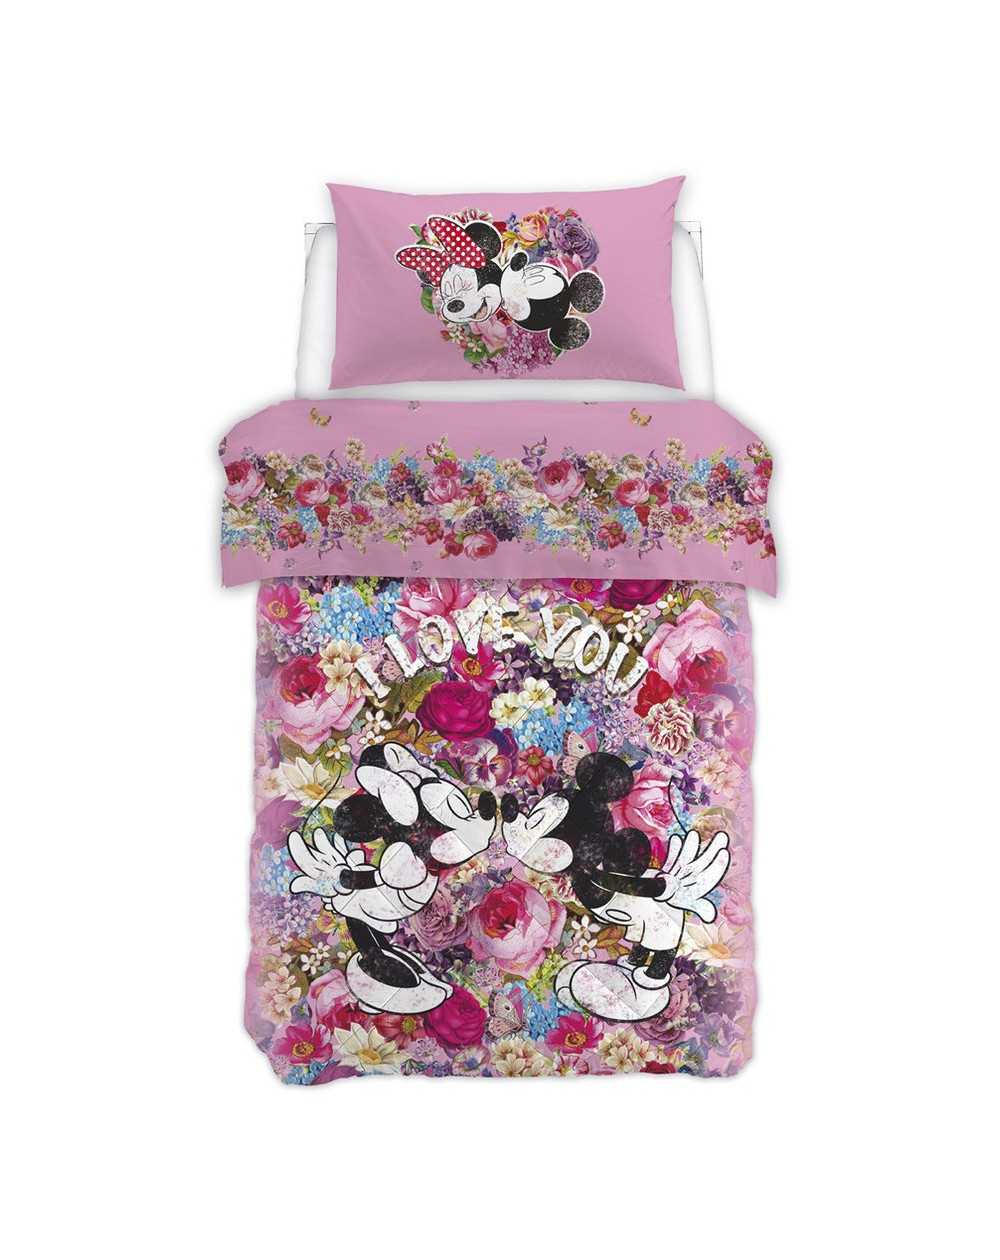 Single Bed SET Flat sheet, fitted sheet, pillowcases Minnie " Love "